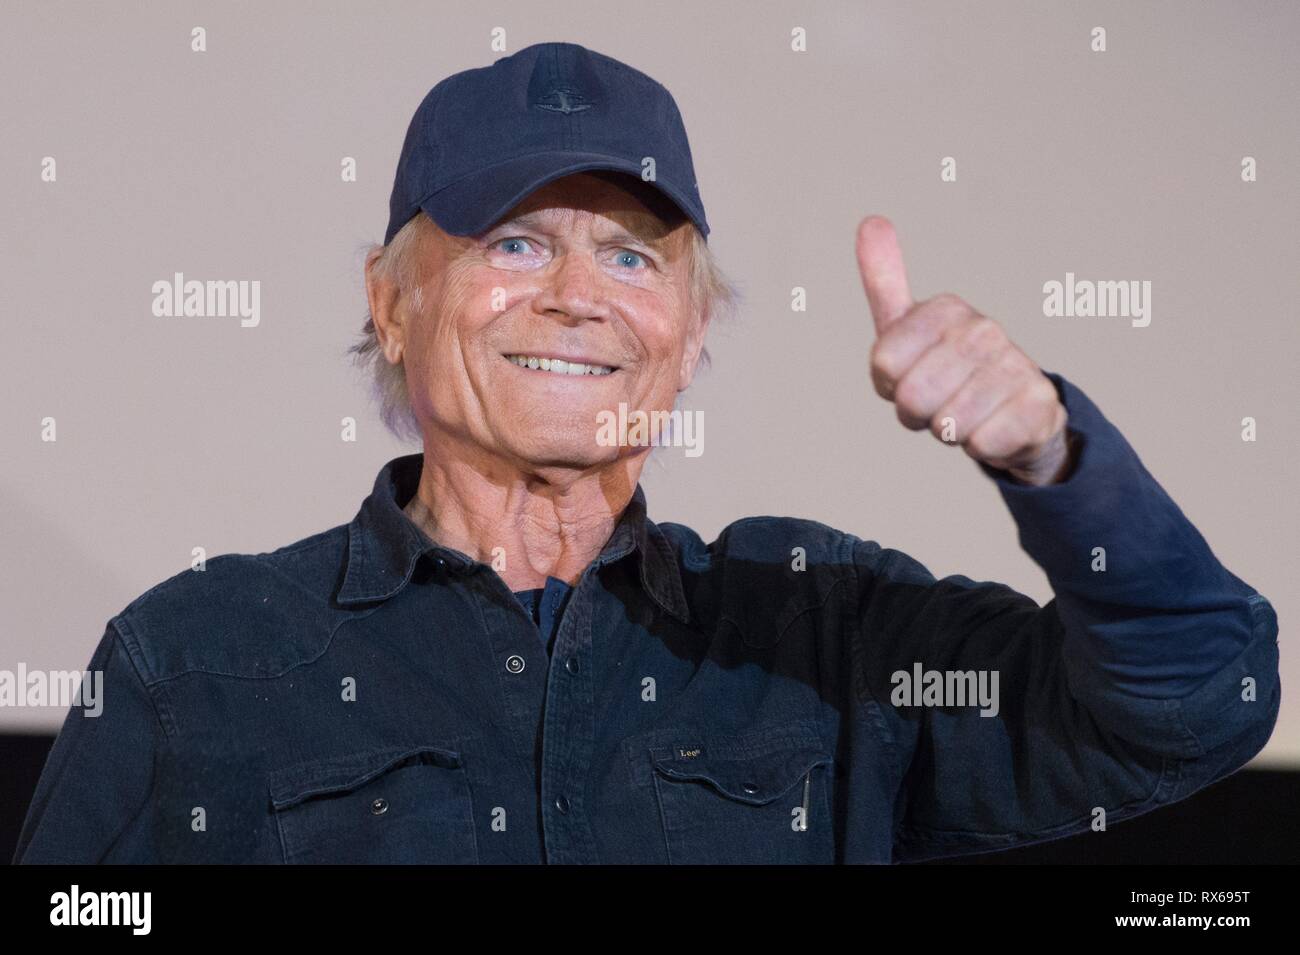 Dresden, Germany. 20th Aug, 2018. The Italian actor Terence Hill comes to the German premiere of his film 'Mein Name ist Somebody - Zwei Fäuste kekehren zurück'. Hill also directed and wrote the tragicomedy. Credit: Sebastian Kahnert/dpa-Zentralbild/dpa | usage worldwide/dpa/Alamy Live News Stock Photo